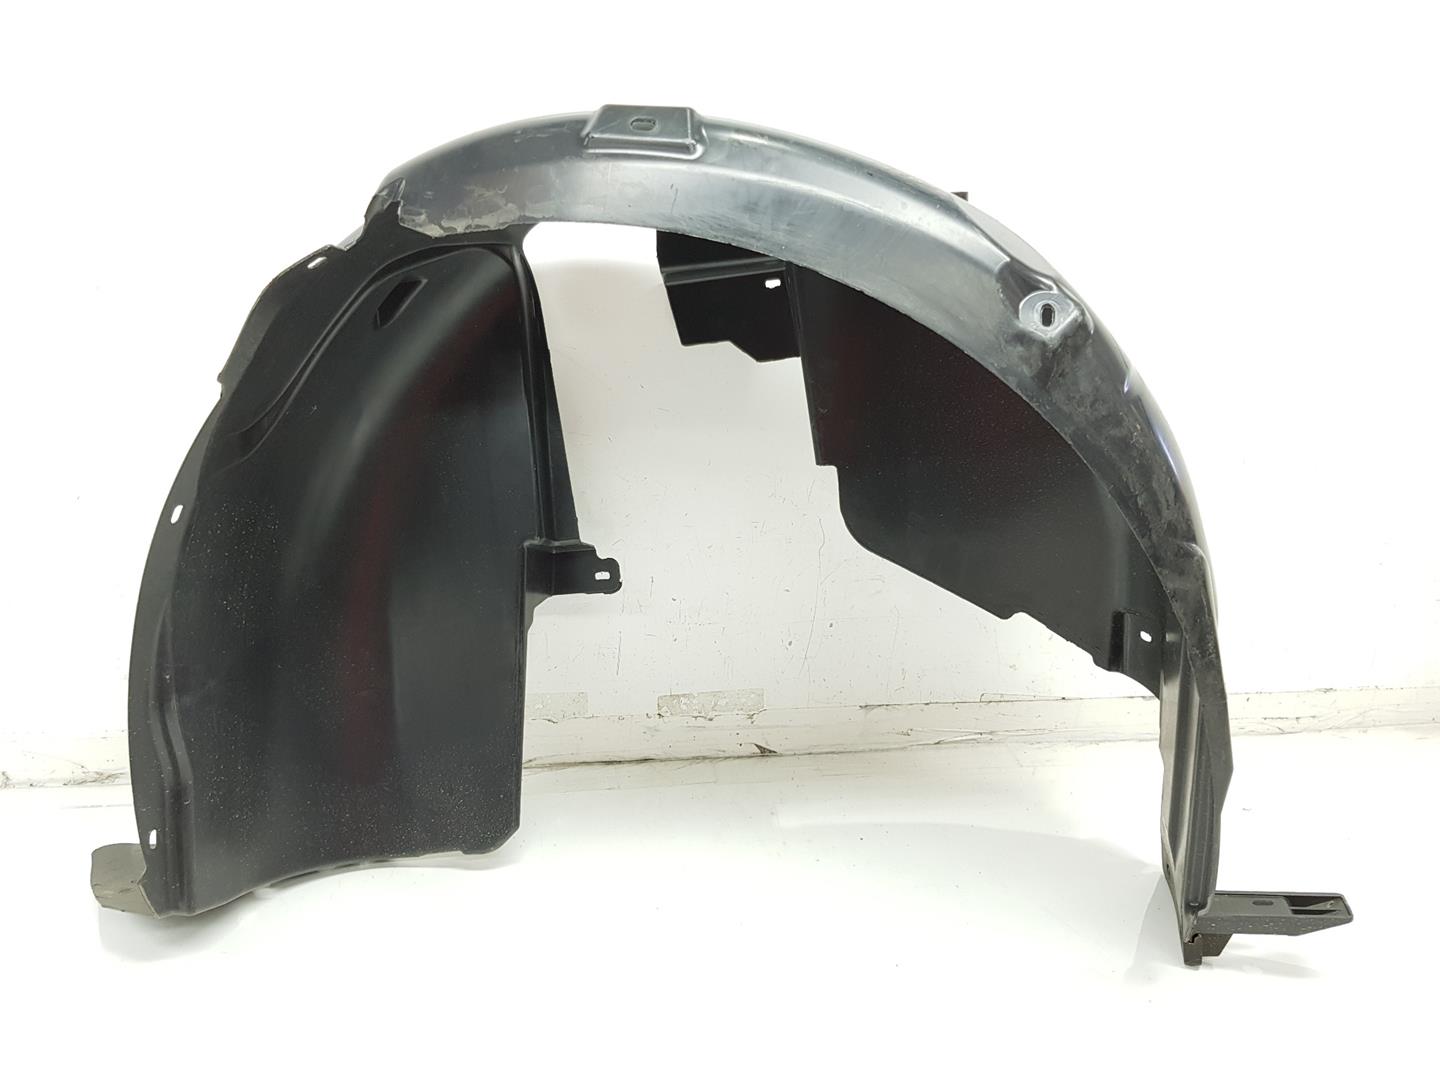 SEAT Alhambra 2 generation (2010-2021) Other Body Parts 6F0810970N, 6F0810970N 25101063